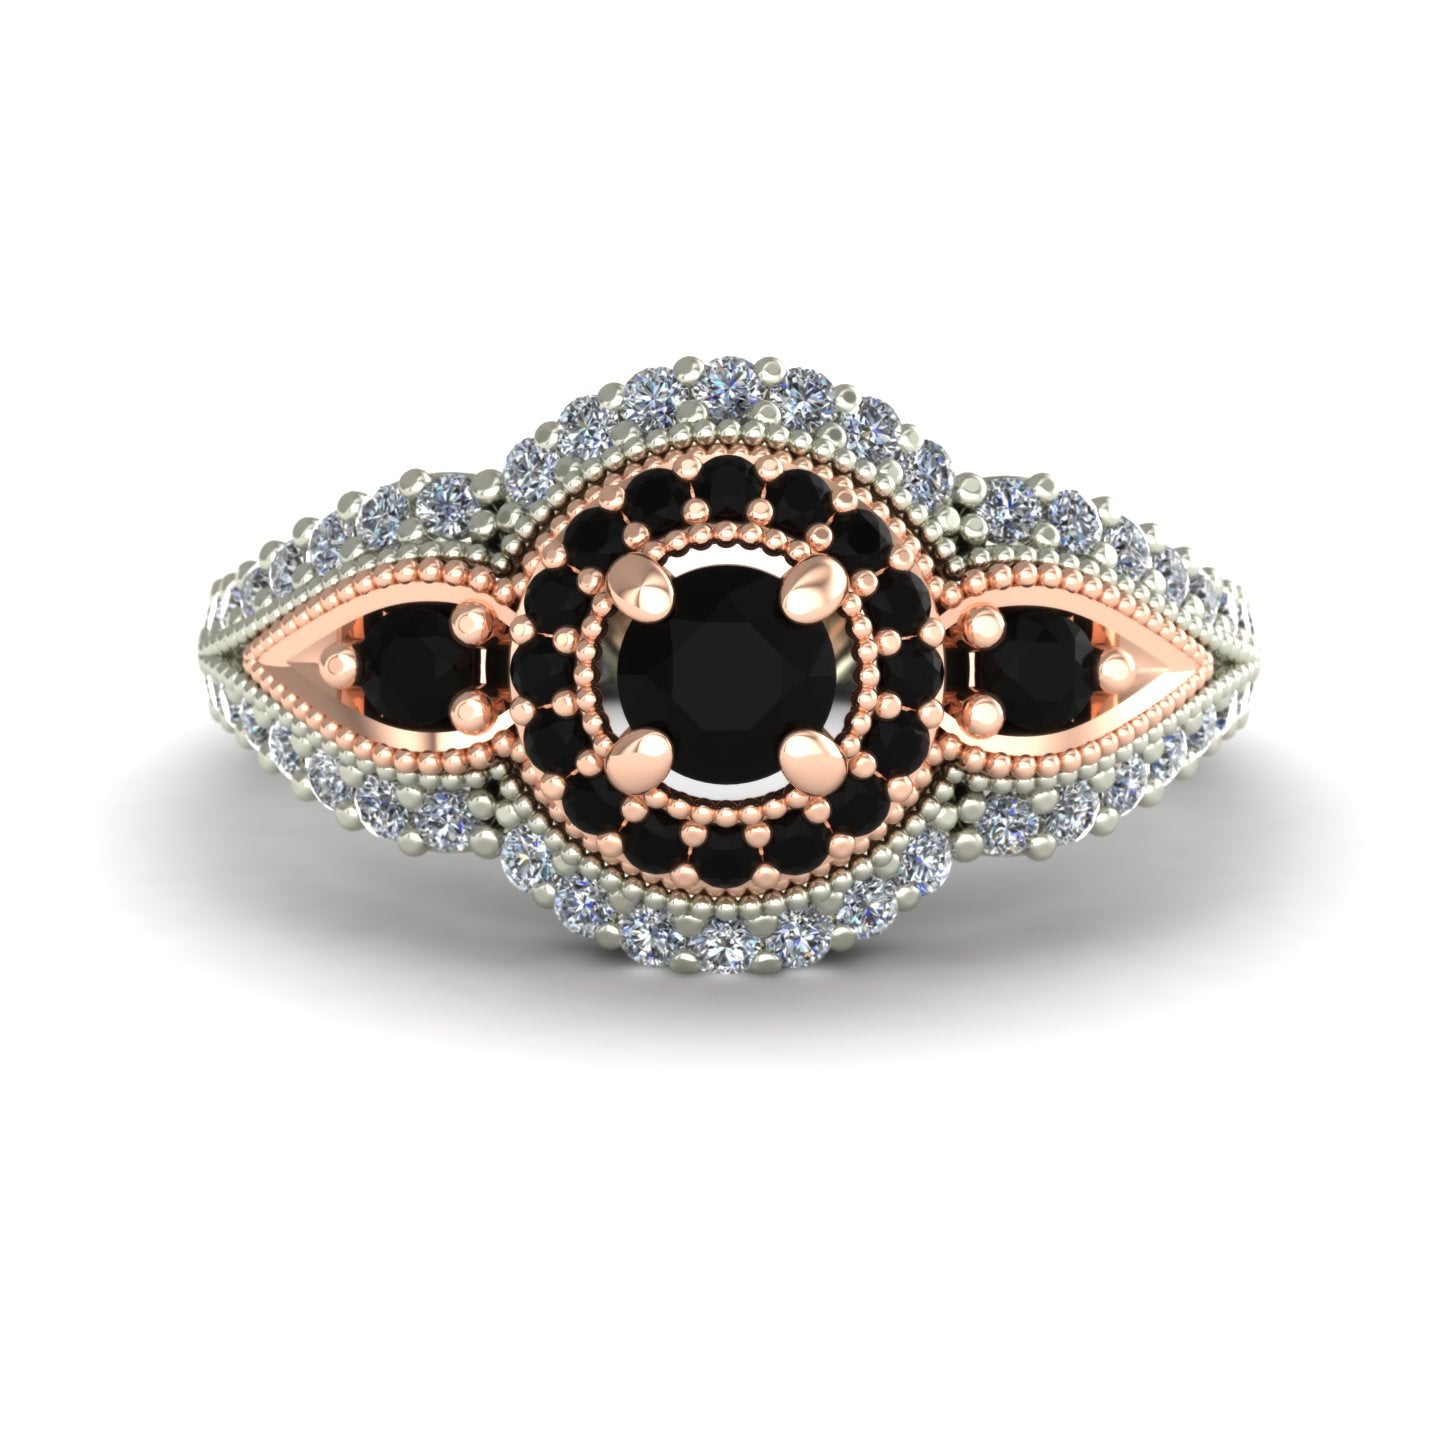 Black diamond two tone engagement ring in 14k white and rose gold - Charles Babb Designs - top view